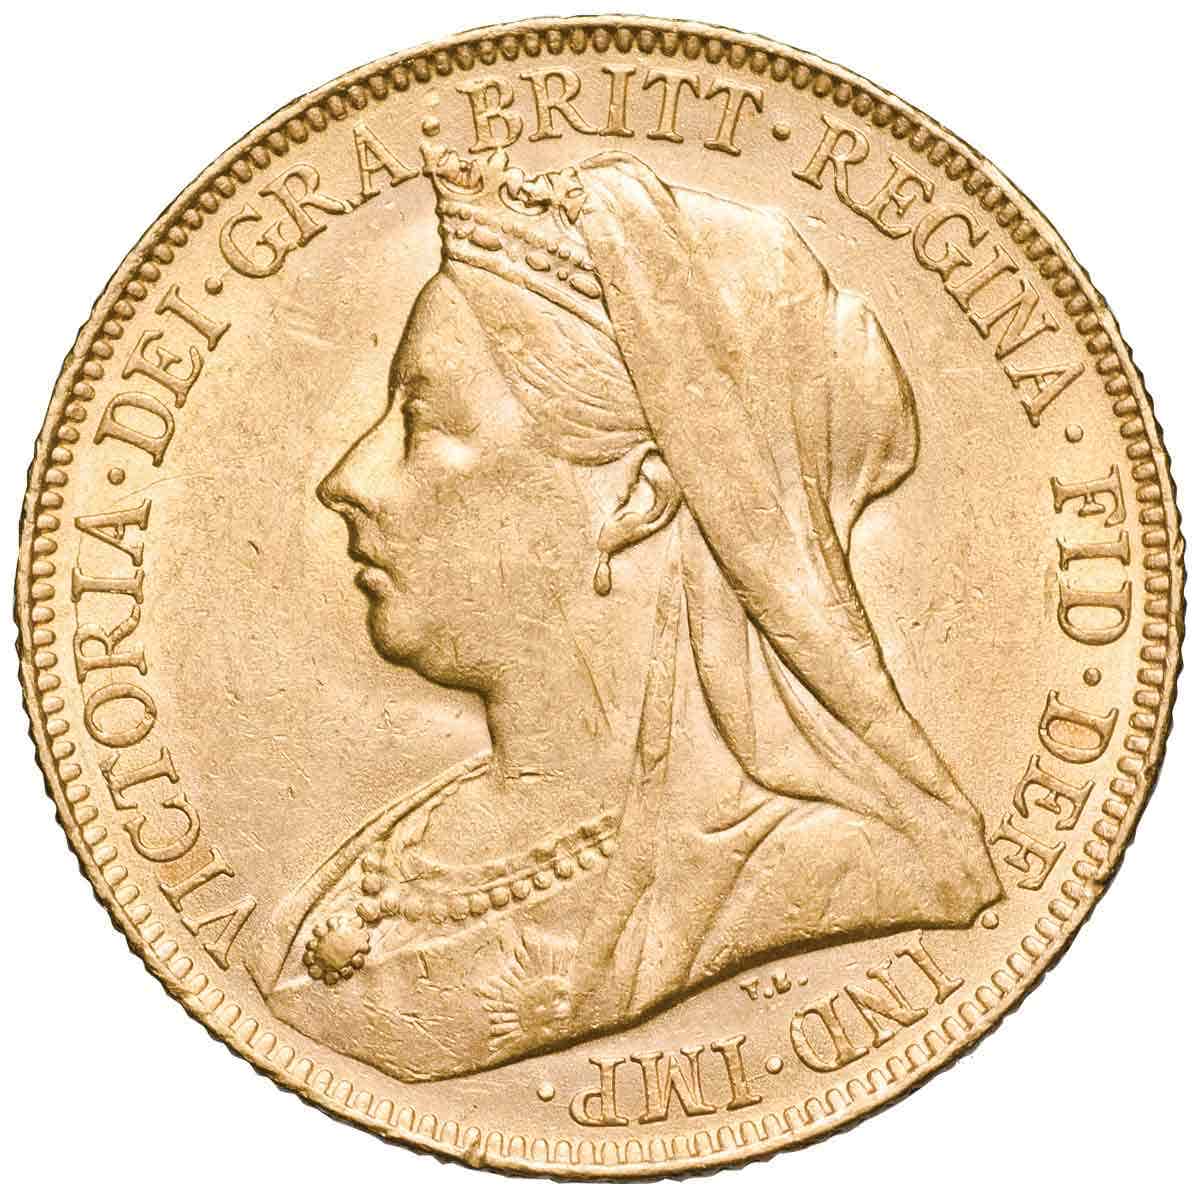 Queen Victoria 1899P Veiled Head Gold Sovereign Extremely Fine